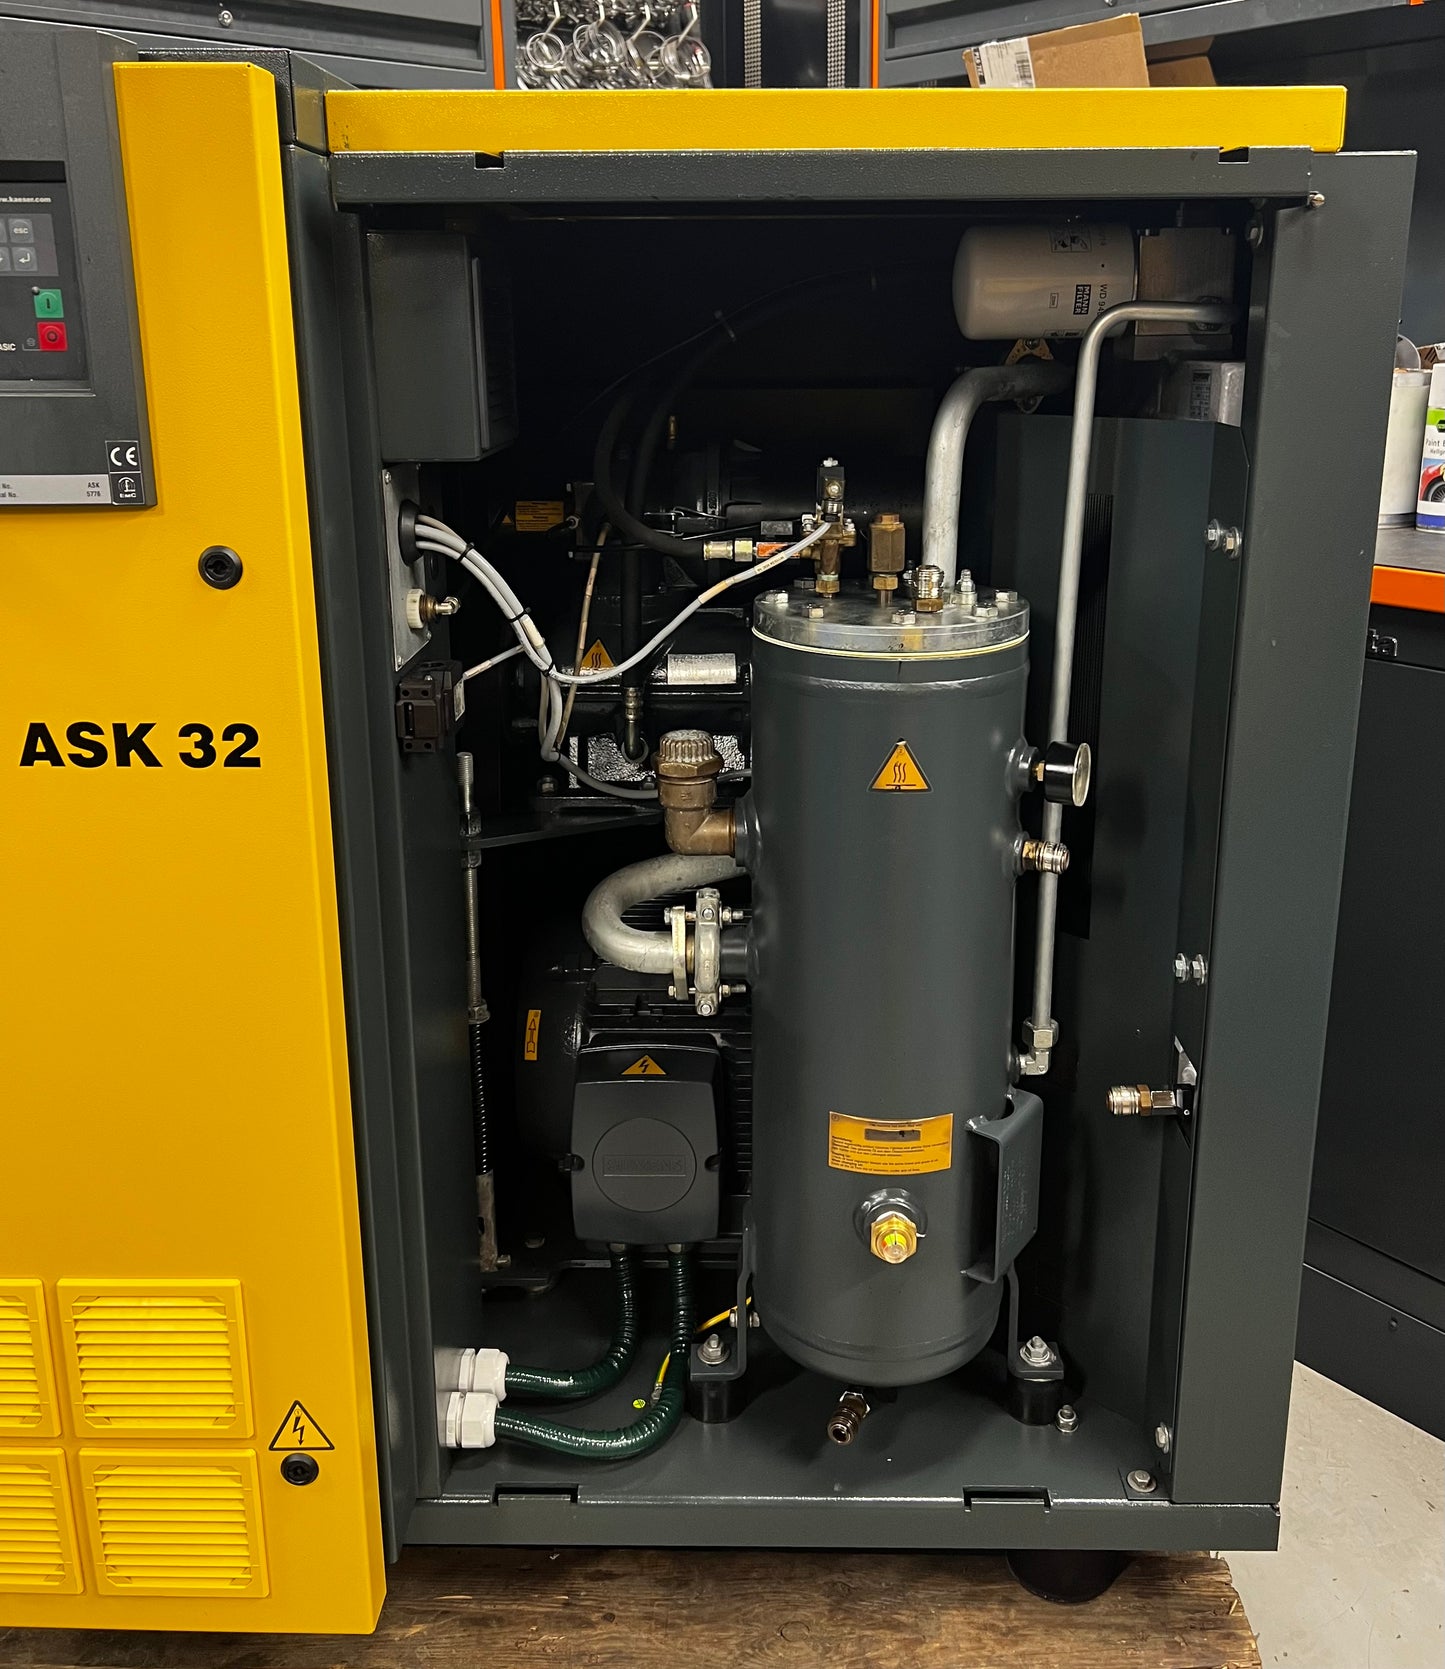 Kaeser ASK32SFC Variable Speed Drive Rotary Screw Compressor (18.5kW, 25.0HP, 102CFM)